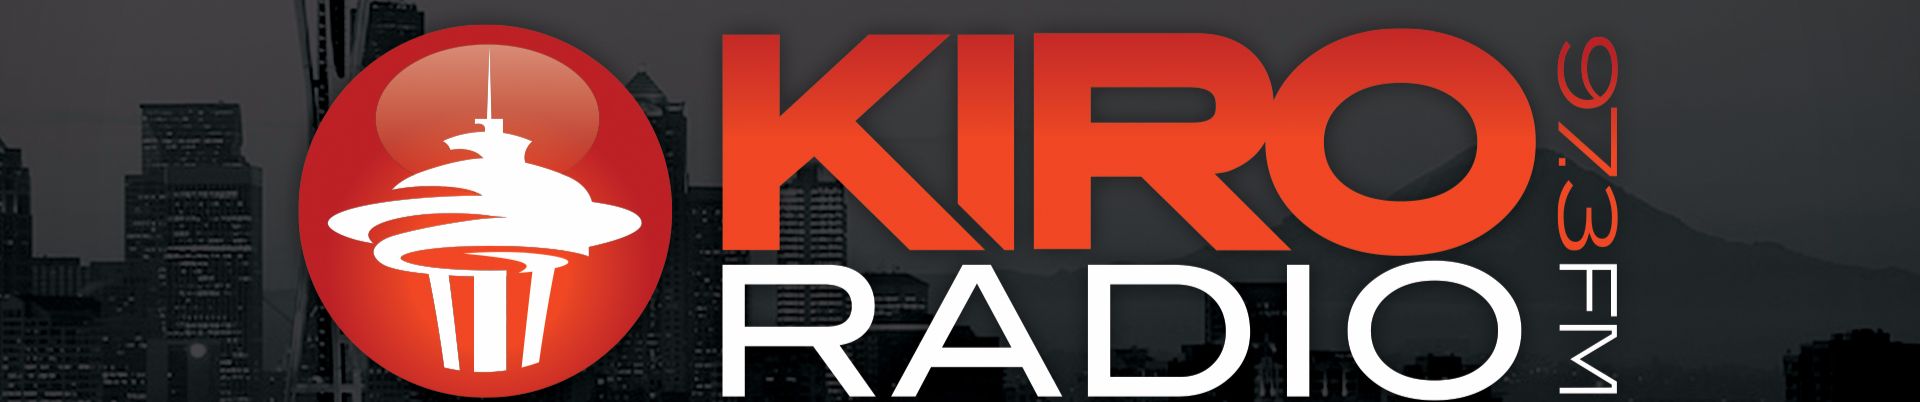 Stream Kiro Radio 97.3 FM | Listen to podcast episodes online for free on  SoundCloud